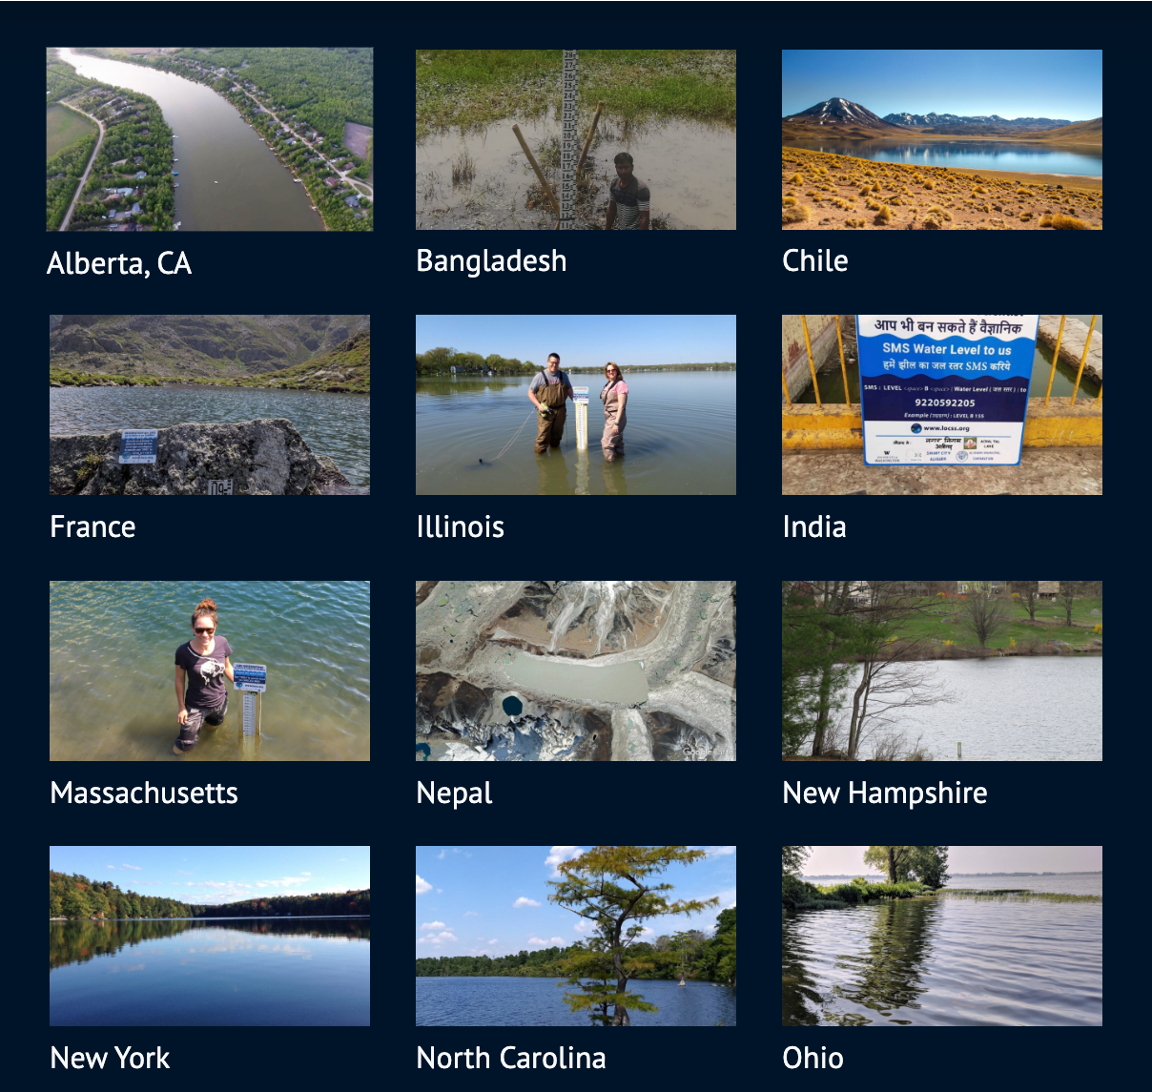 Image shows a grid of twelve thumbnail photographs of water bodies, each labeled with their region. Regions represented are, top to bottom and read left to right, include Alberta, Canada under an image of a river or long and narrow lake; Bangladesh with an image of flooded field; Chile, with a lake next to dry, reddish land; France, with an image of an alpine lake with jagged rocks on the shoreline; Illinois, with a man and woman standing in waders in a lake next to a project gauge; India with a close-up of the project sign; Massachusetts, with a woman standing in waders next to a gauge; Nepal with an aerial image of a glacial lake and the glaciers that feed it; New Hampshire with a lake and a green lawn on the far shore; New York with an unruffled lake reflecting the forest that surrounds it and the blue sky; North Carolina with ruffled lake surrounded by trees and a tall pine in the foreground; Ohio, with a gently lapping lake with a distant far shore.